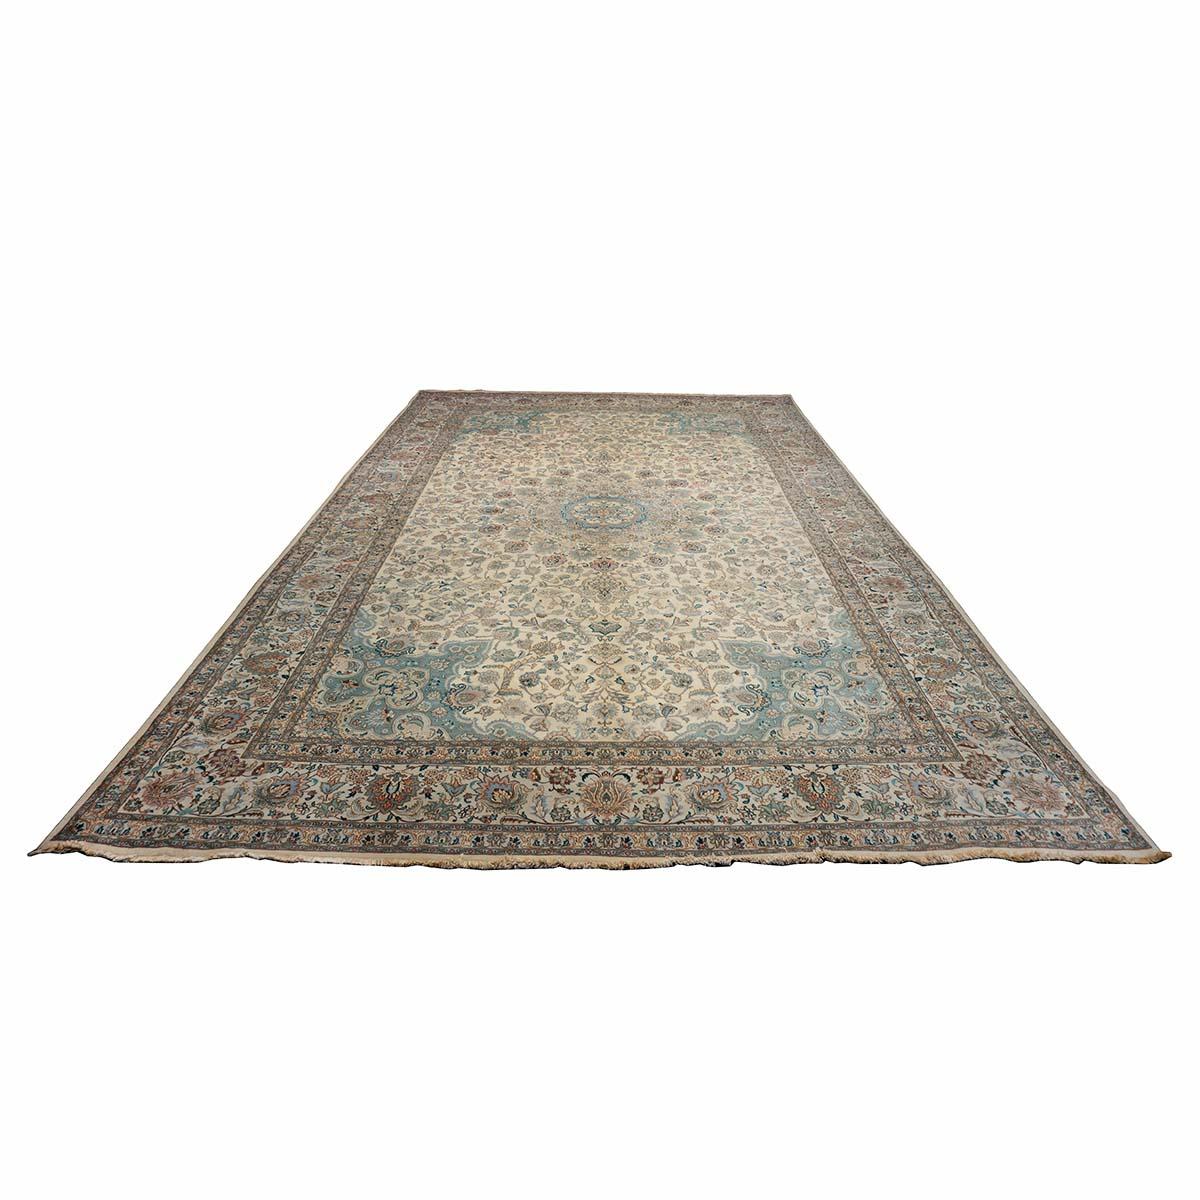  Ashly Fine Rugs presents a 1940s Antique Persian Pahlavi Tabriz 11x18 Oversized Wool Handmade Rug. Tabriz is a northern city in modern-day Iran and has forever been famous for the fineness and craftsmanship of its handmade rugs. These rugs are